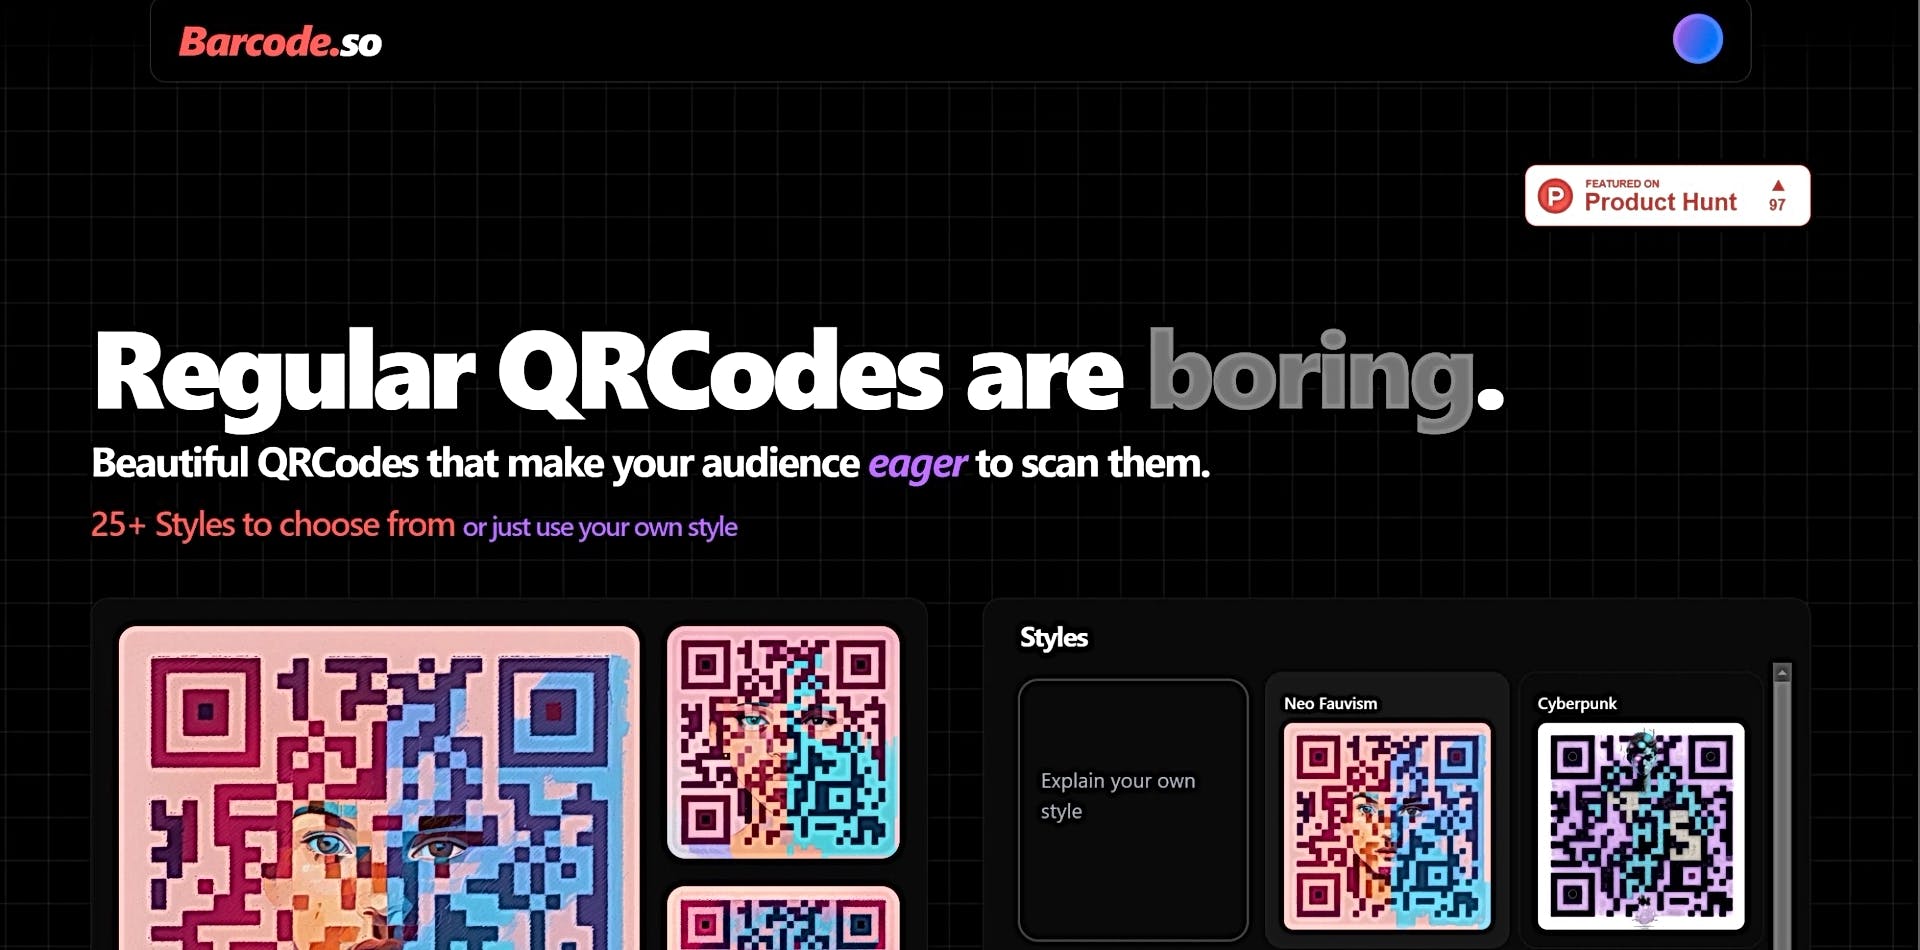 Barcode.so featured